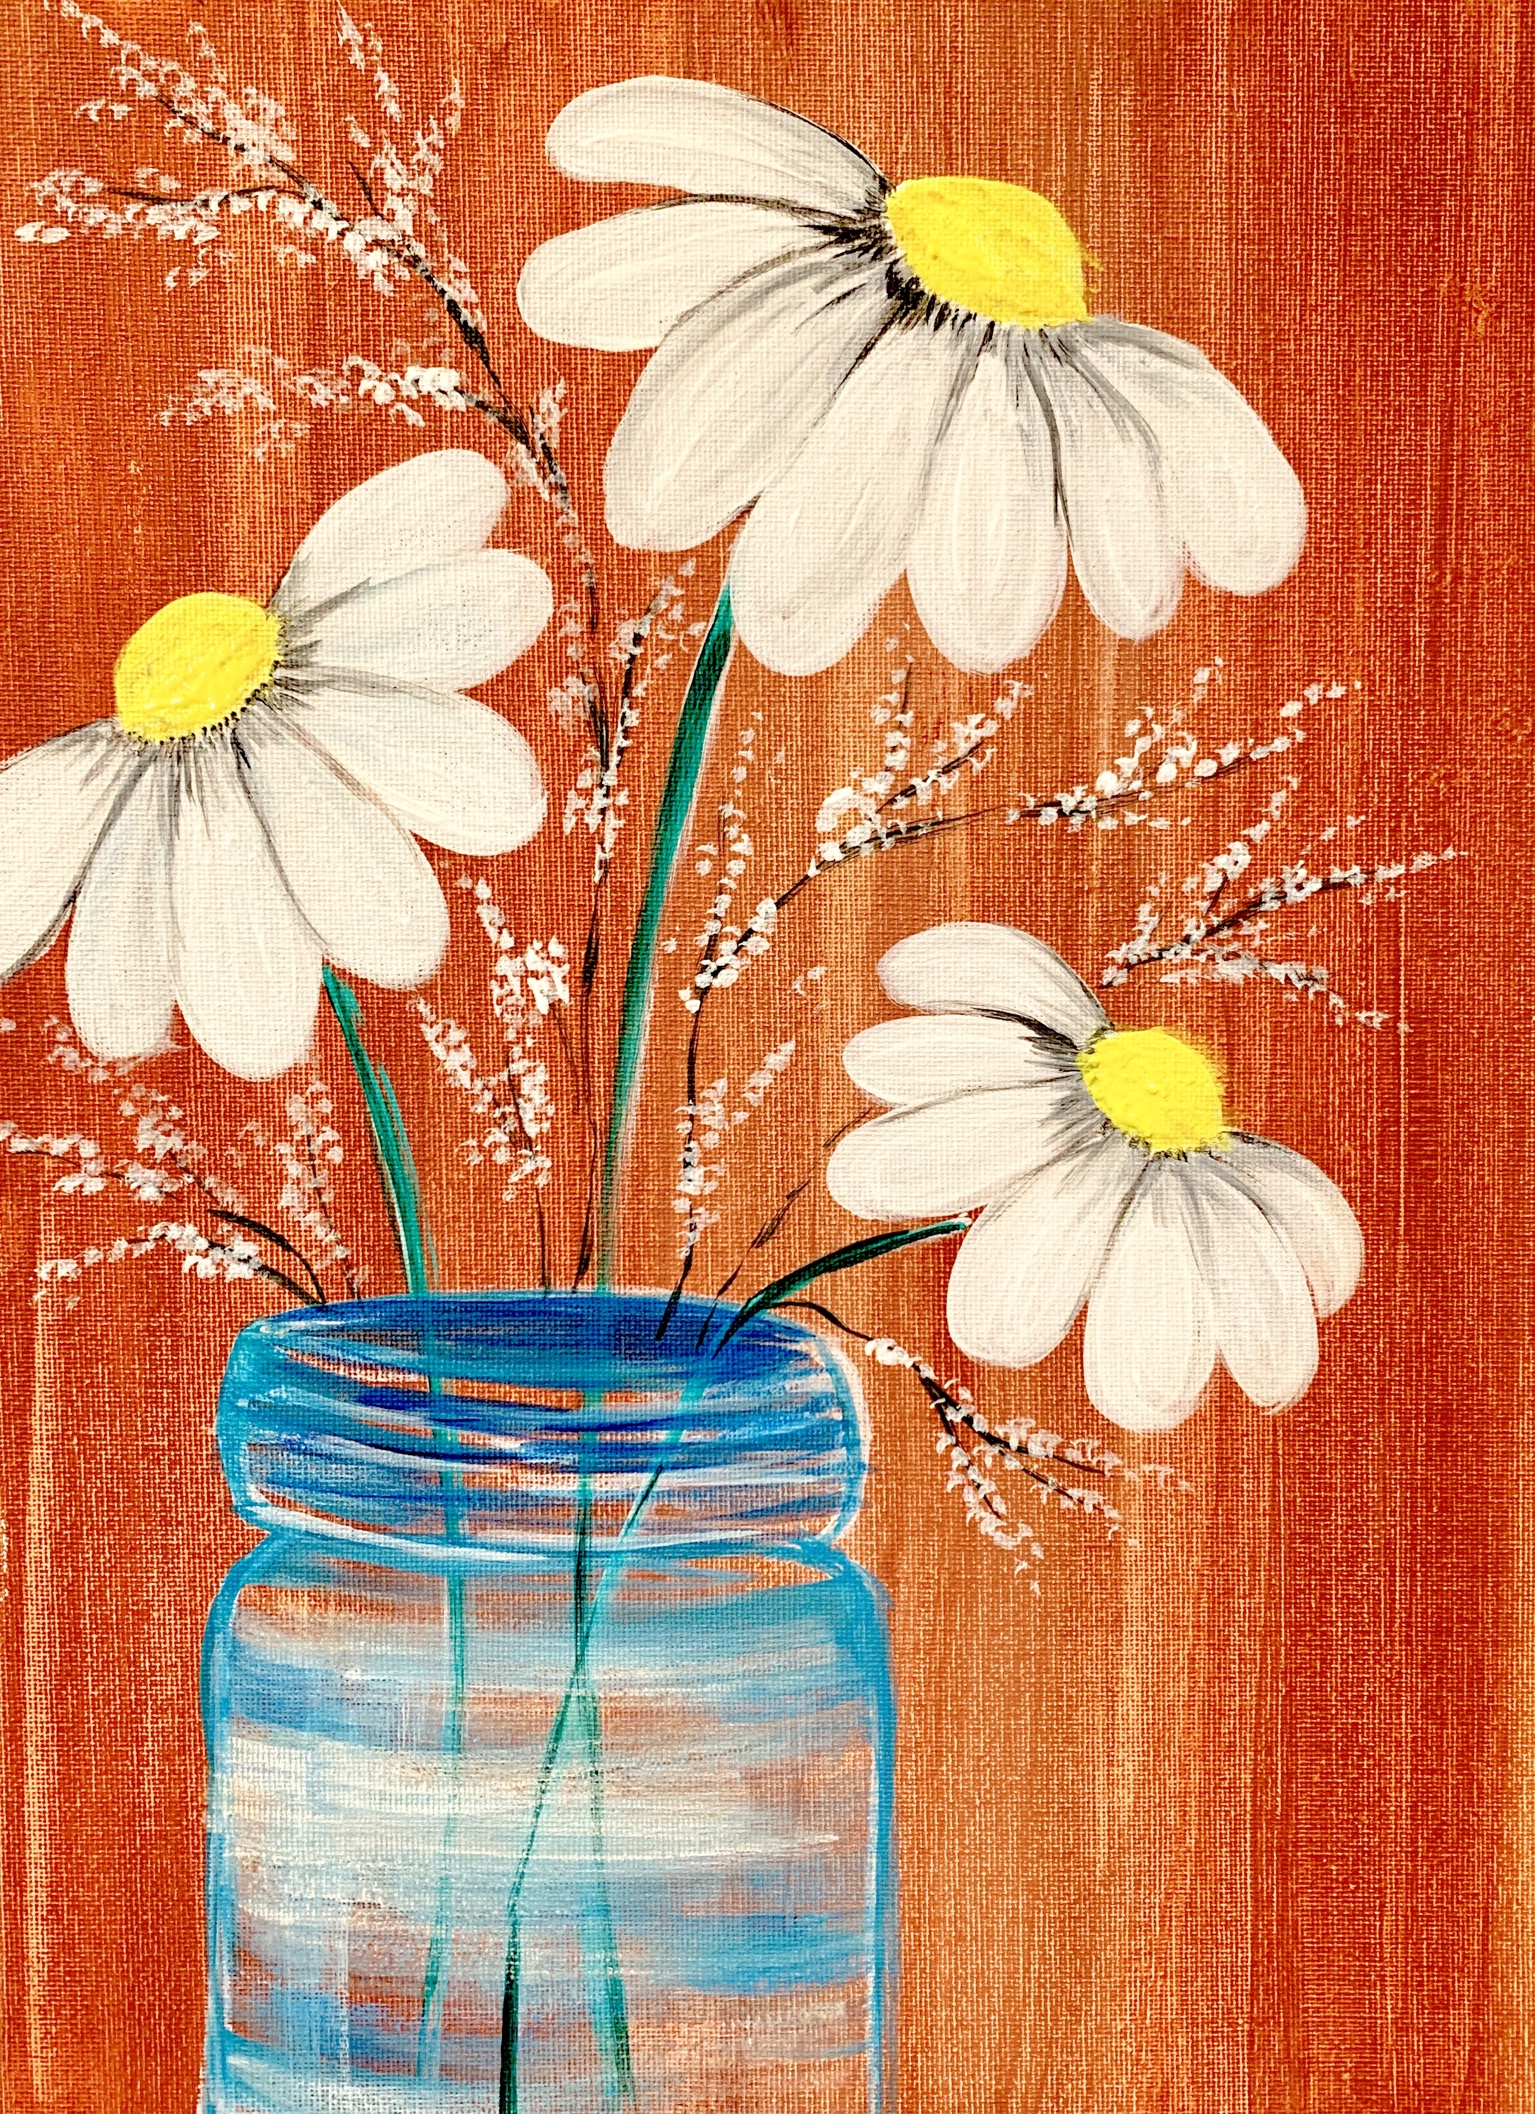 A Mason Jar Daisies experience project by Yaymaker